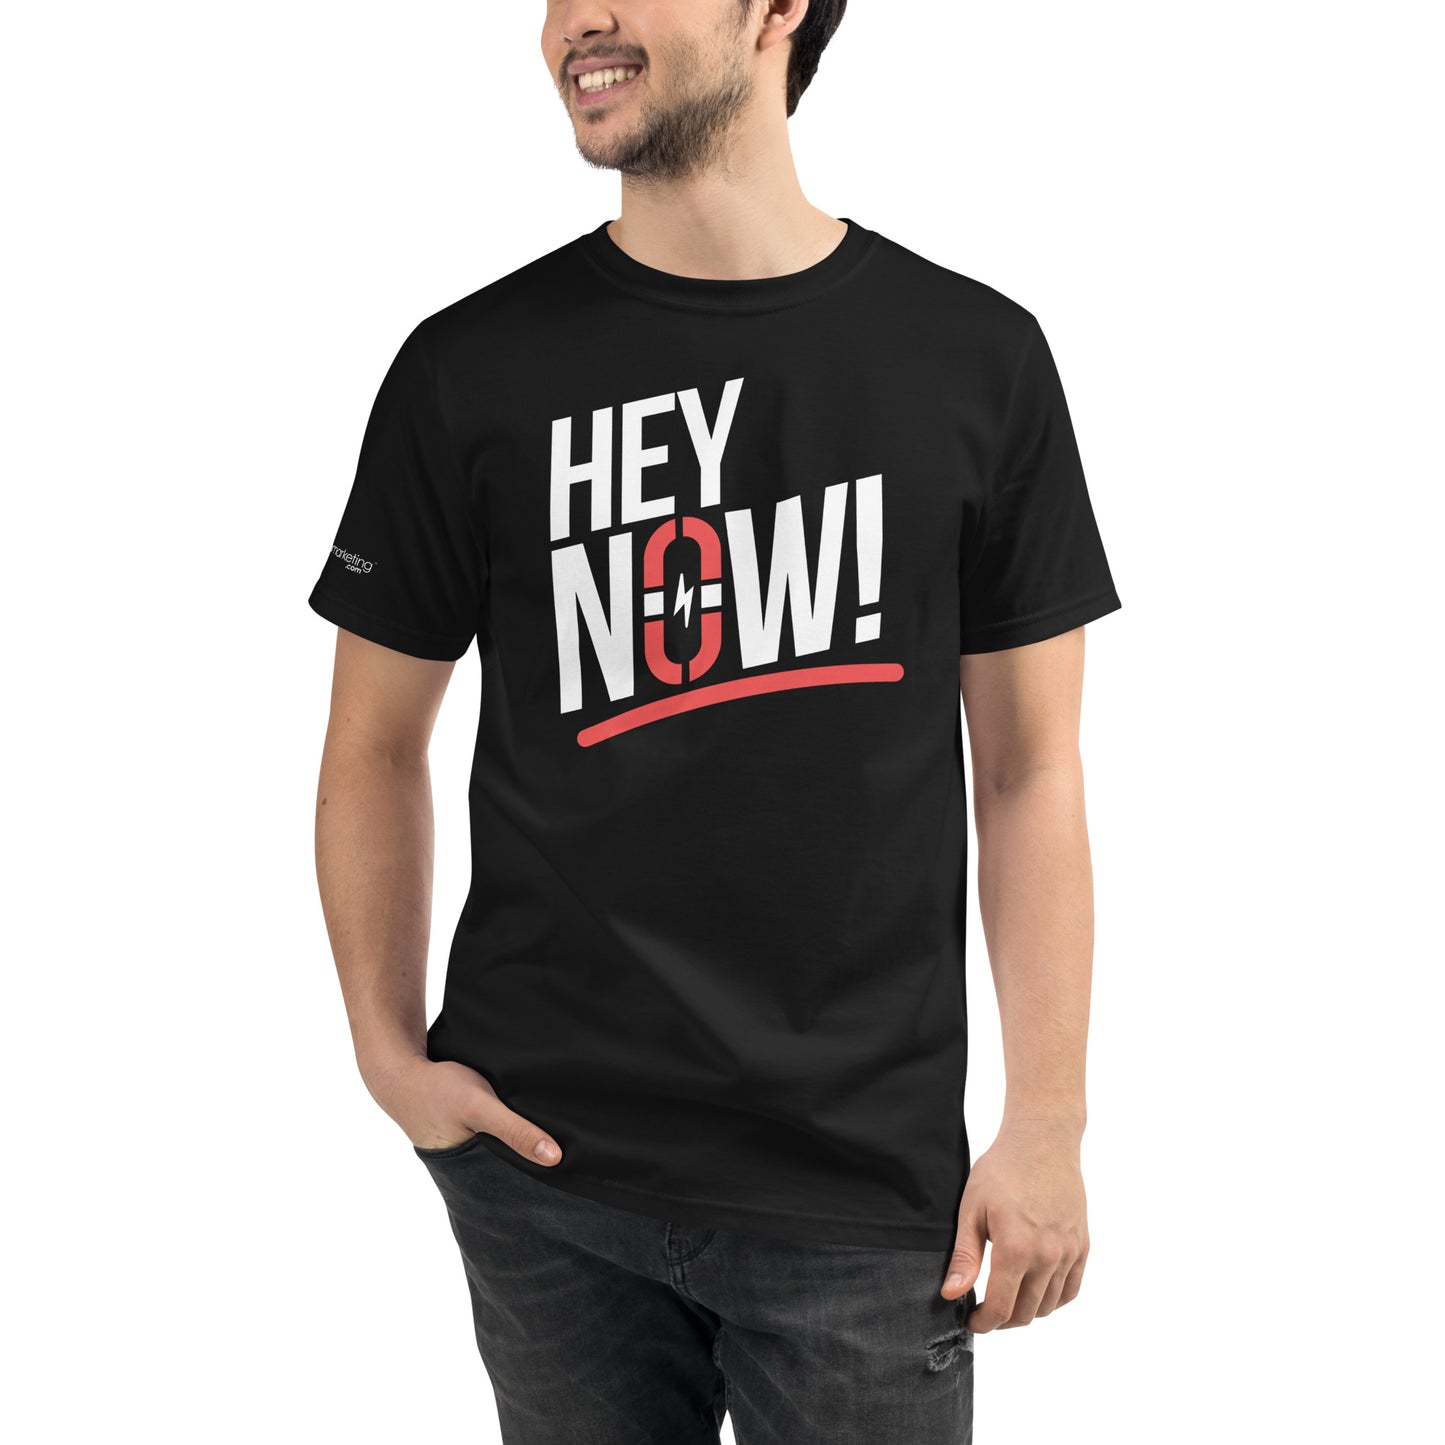 Hey Now! T-Shirt